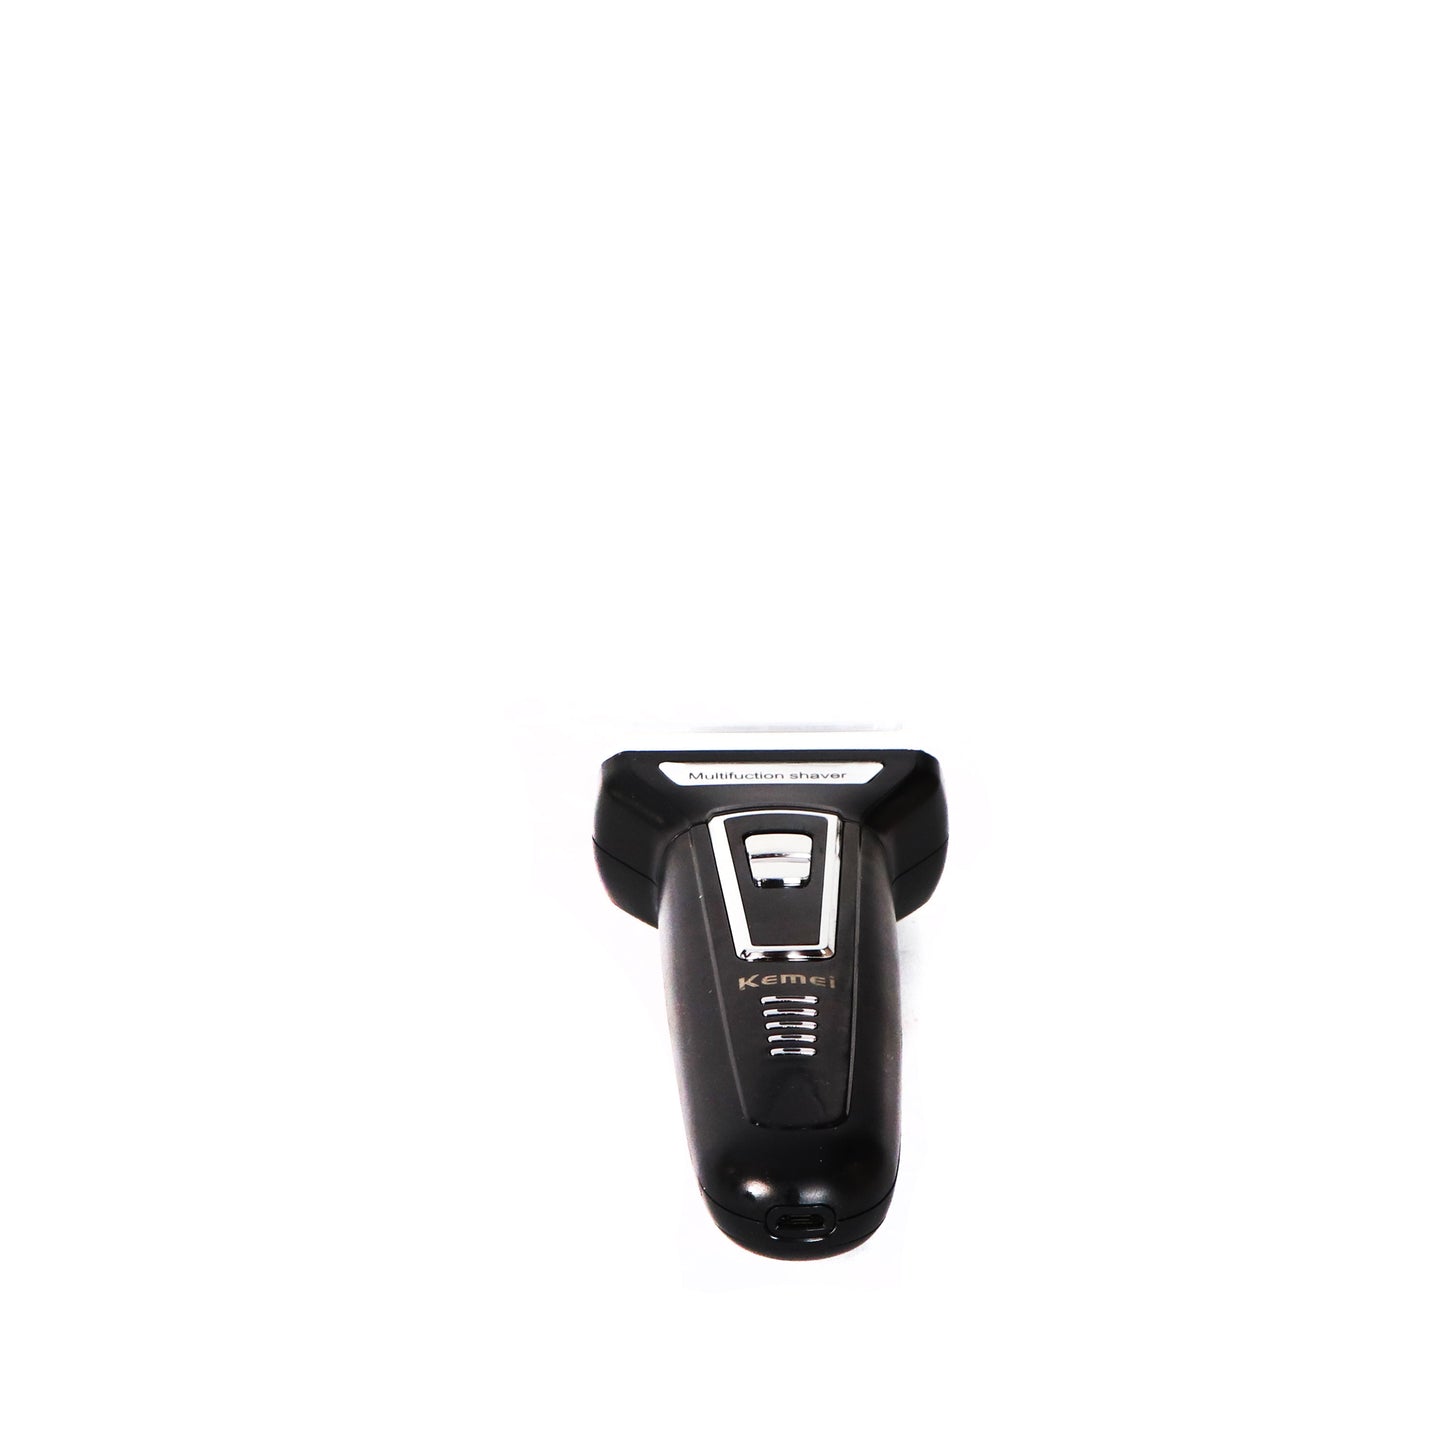 Kemei Electric Hair Clippers KM-6559 Black-Royal Brands Co-